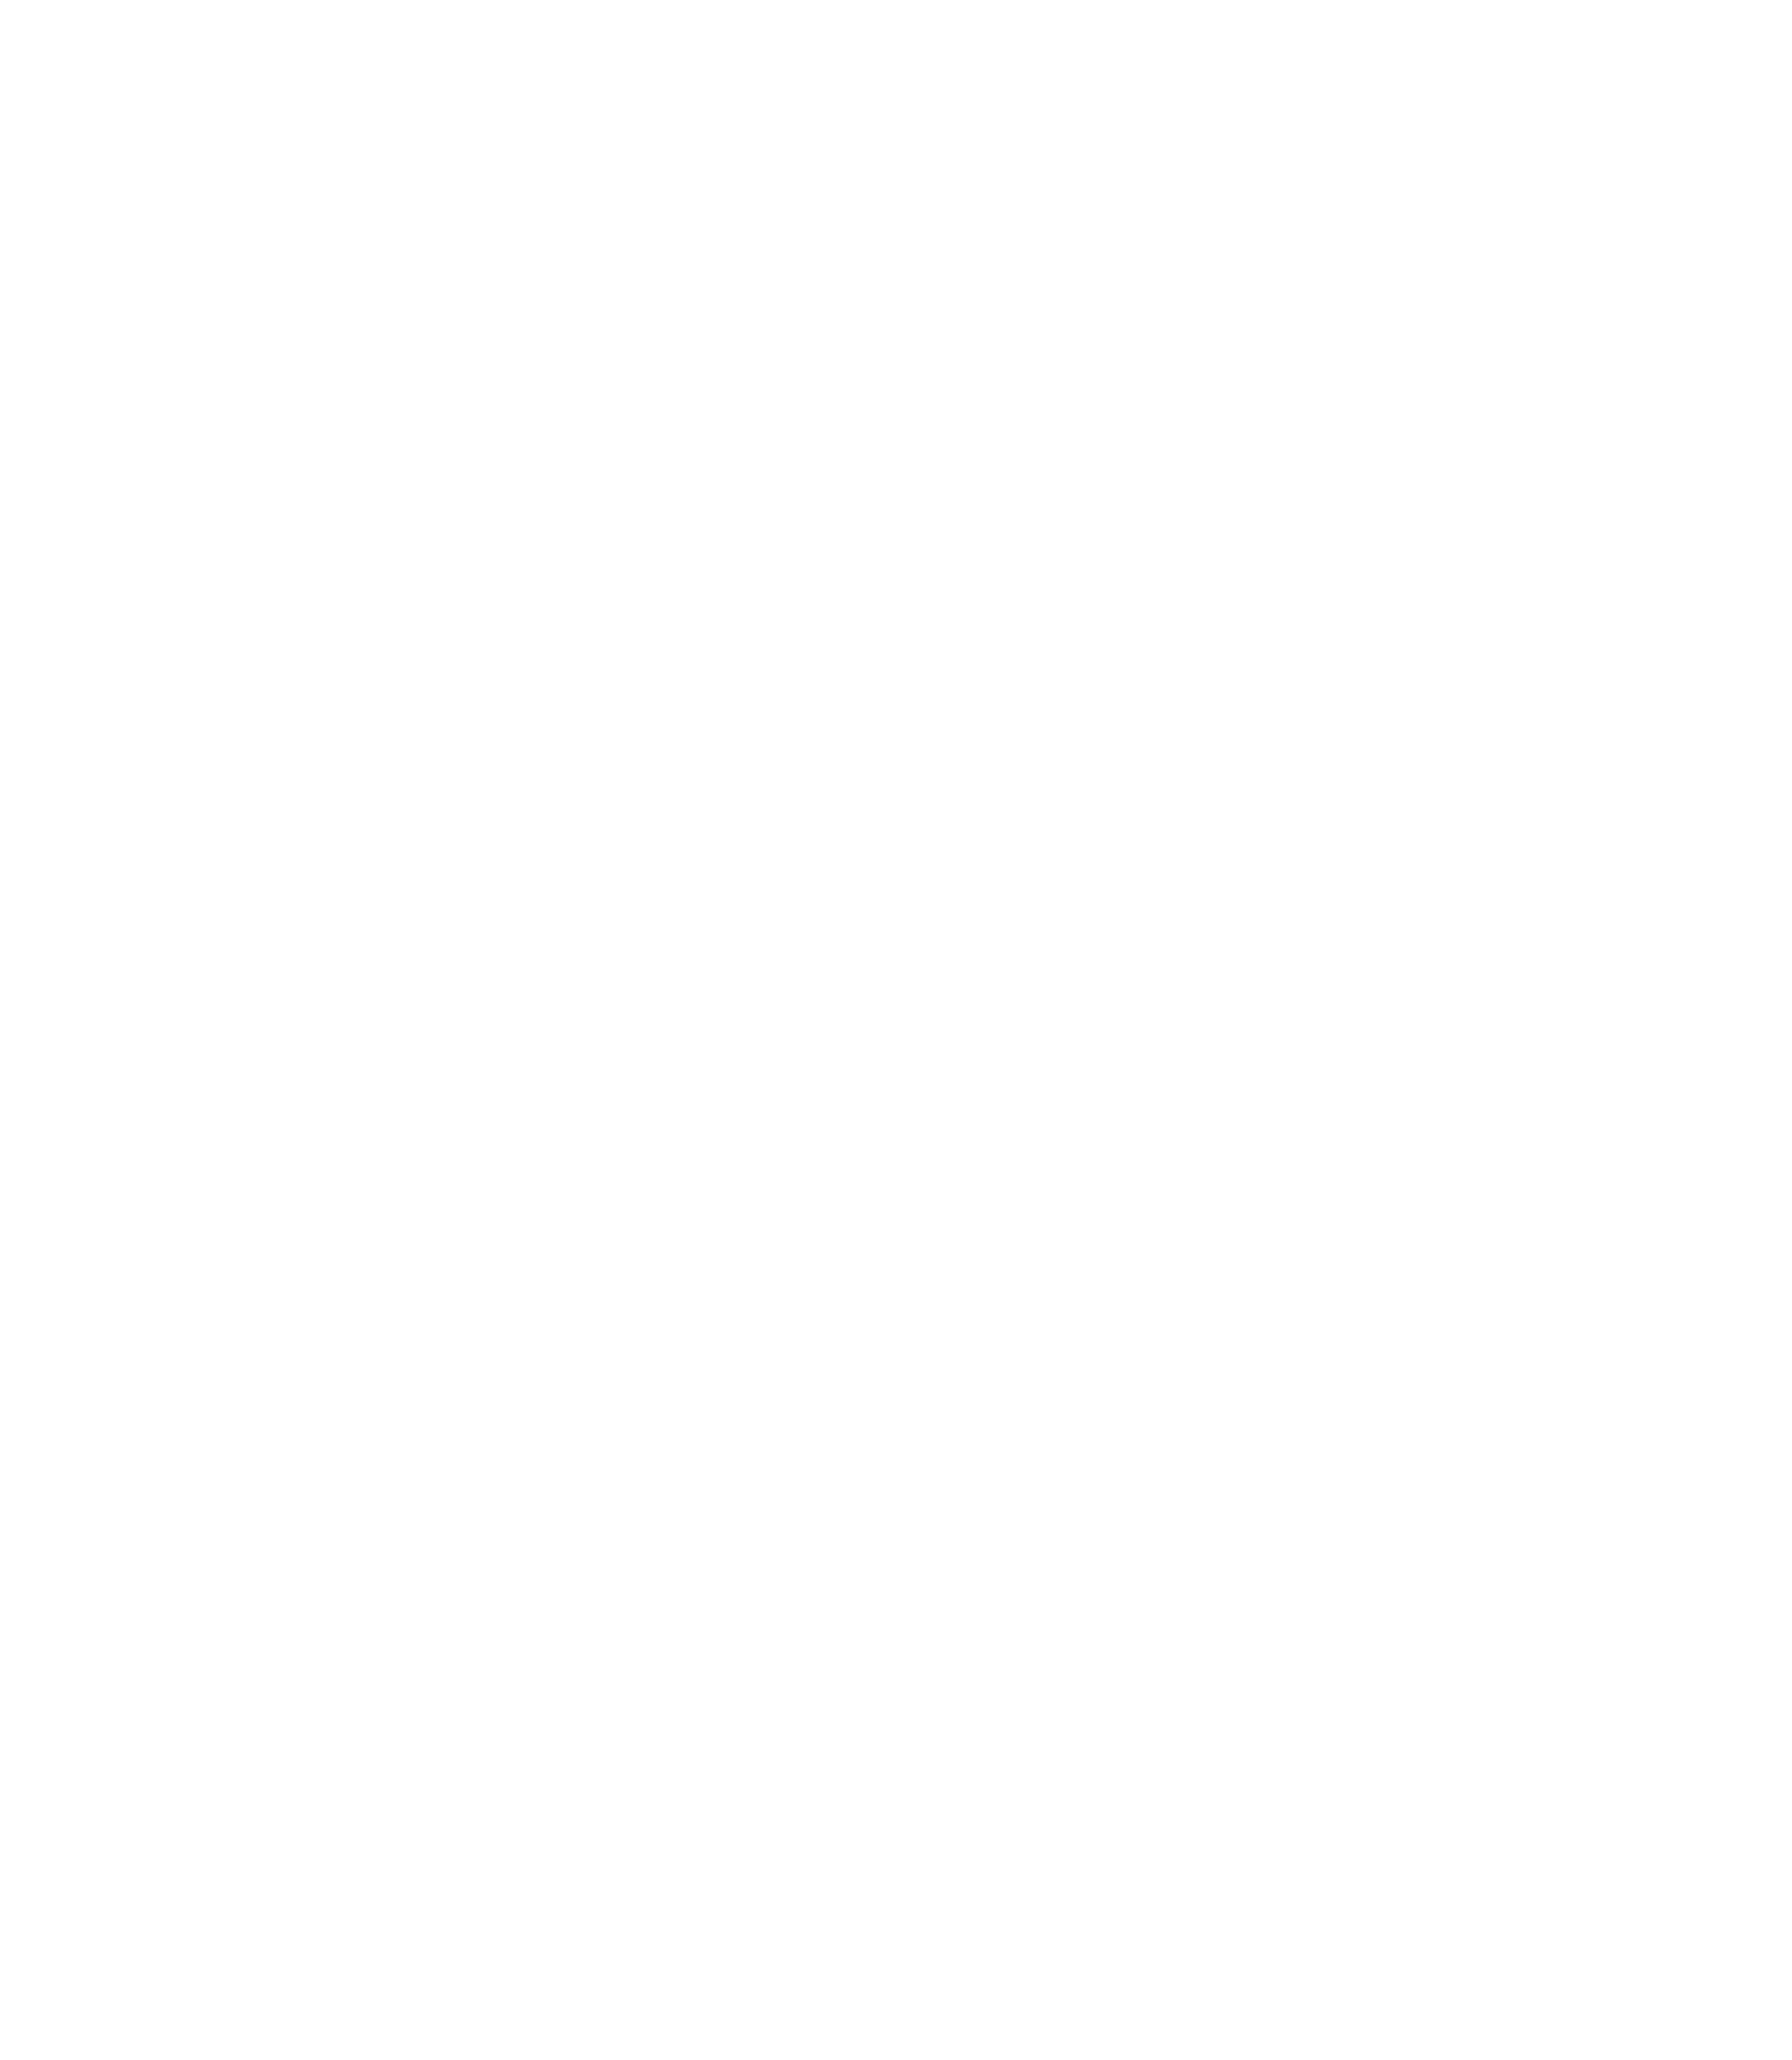 Charge_your_car_day_2023_Oct5_logo_Transparent.png